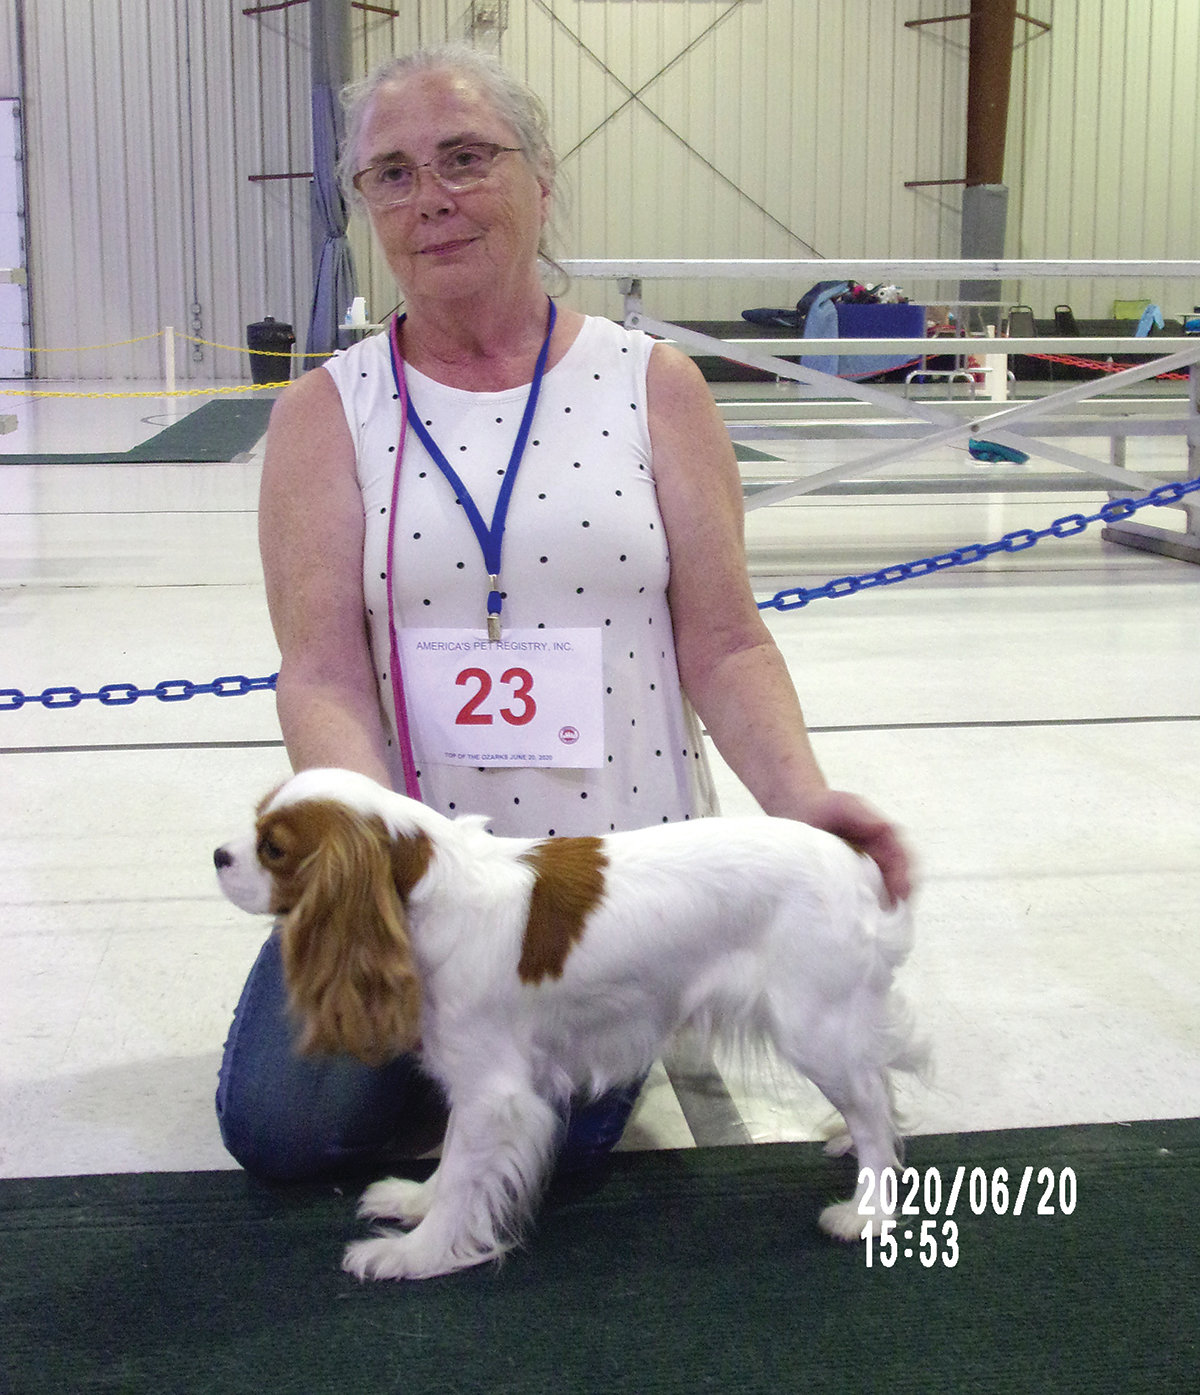 This Cavalier King Charles Cocker Spaniel named Royal Windsor was Top Dog in the first show.